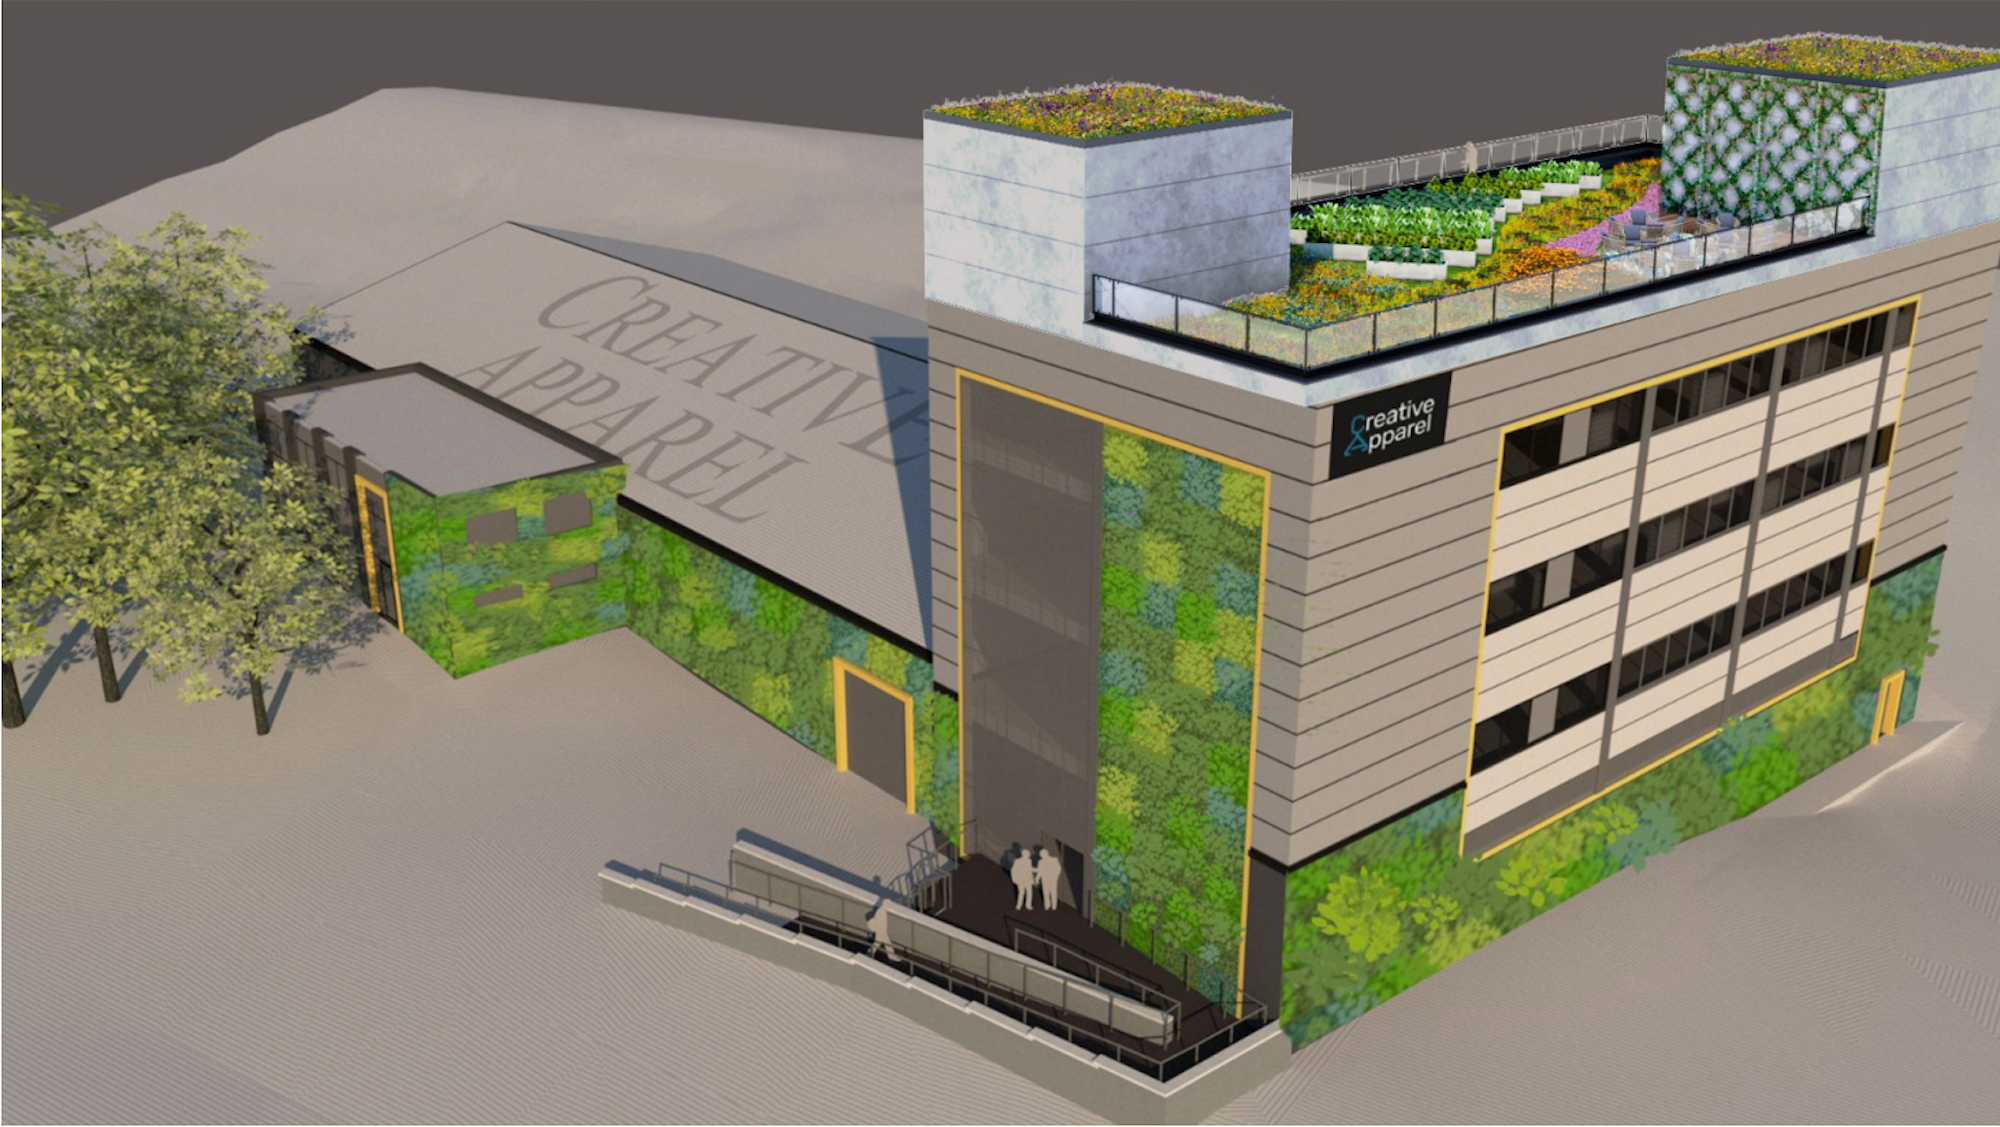 3D isometric drawing of a commercial building designed with green infrastructure like living walls, trees and a roof garden